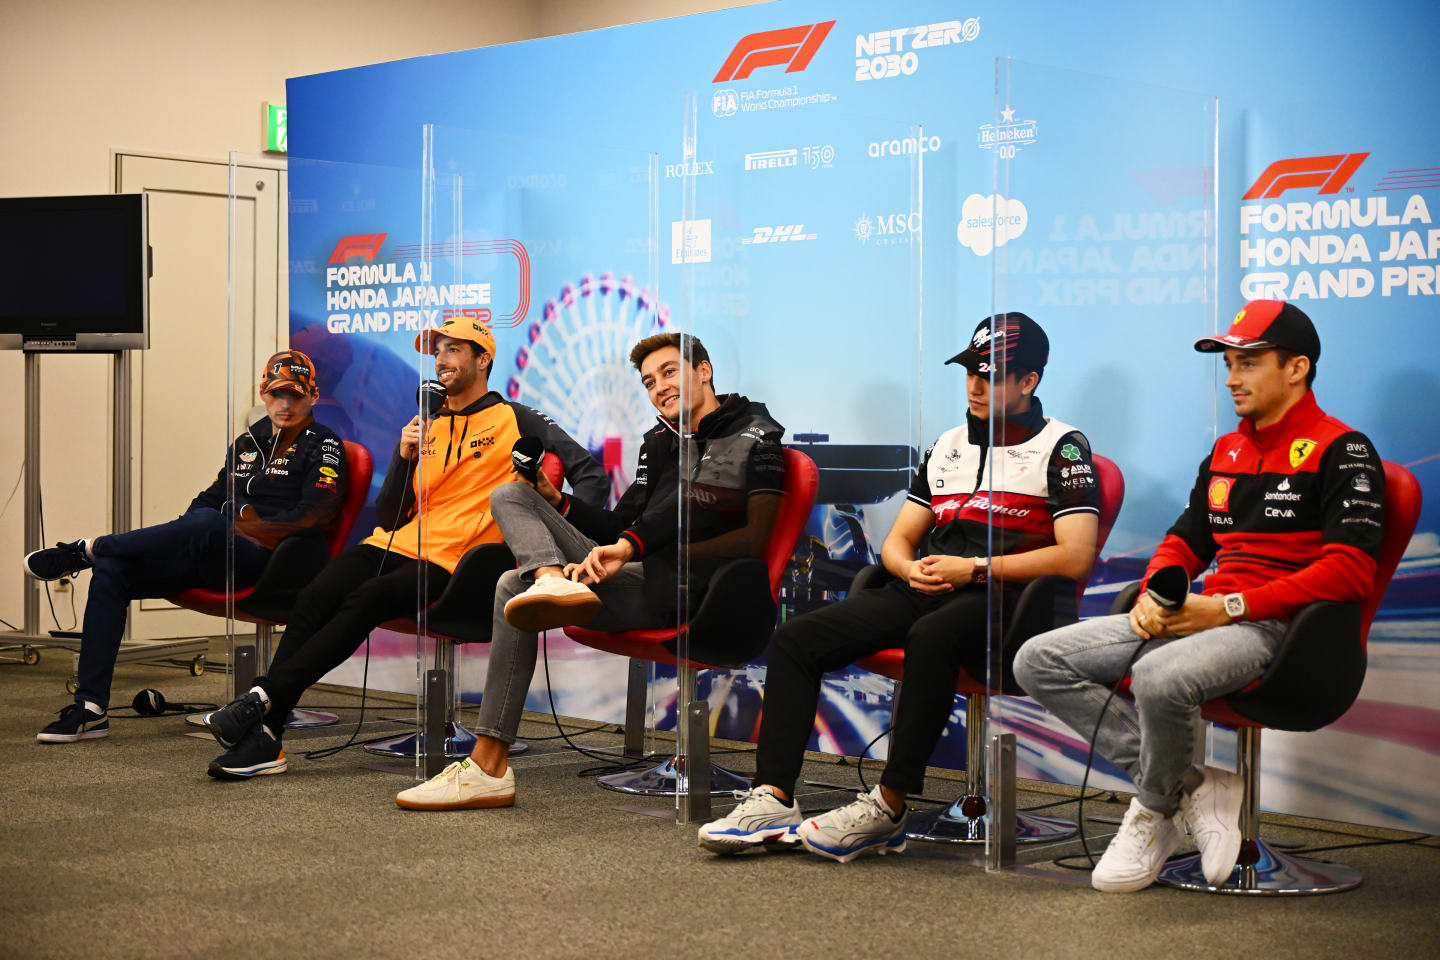 SUZUKA, JAPAN - OCTOBER 06: Max Verstappen of the Netherlands and Oracle Red Bull Racing, Daniel Ricciardo of Australia and McLaren, George Russell of Great Britain and Mercedes, Zhou Guanyu of China and Alfa Romeo F1 and Charles Leclerc of Monaco and Ferrari attend the Drivers Press Conference during previews ahead of the F1 Grand Prix of Japan at Suzuka International Racing Course on October 06, 2022 in Suzuka, Japan. (Photo by Clive Mason/Getty Images)